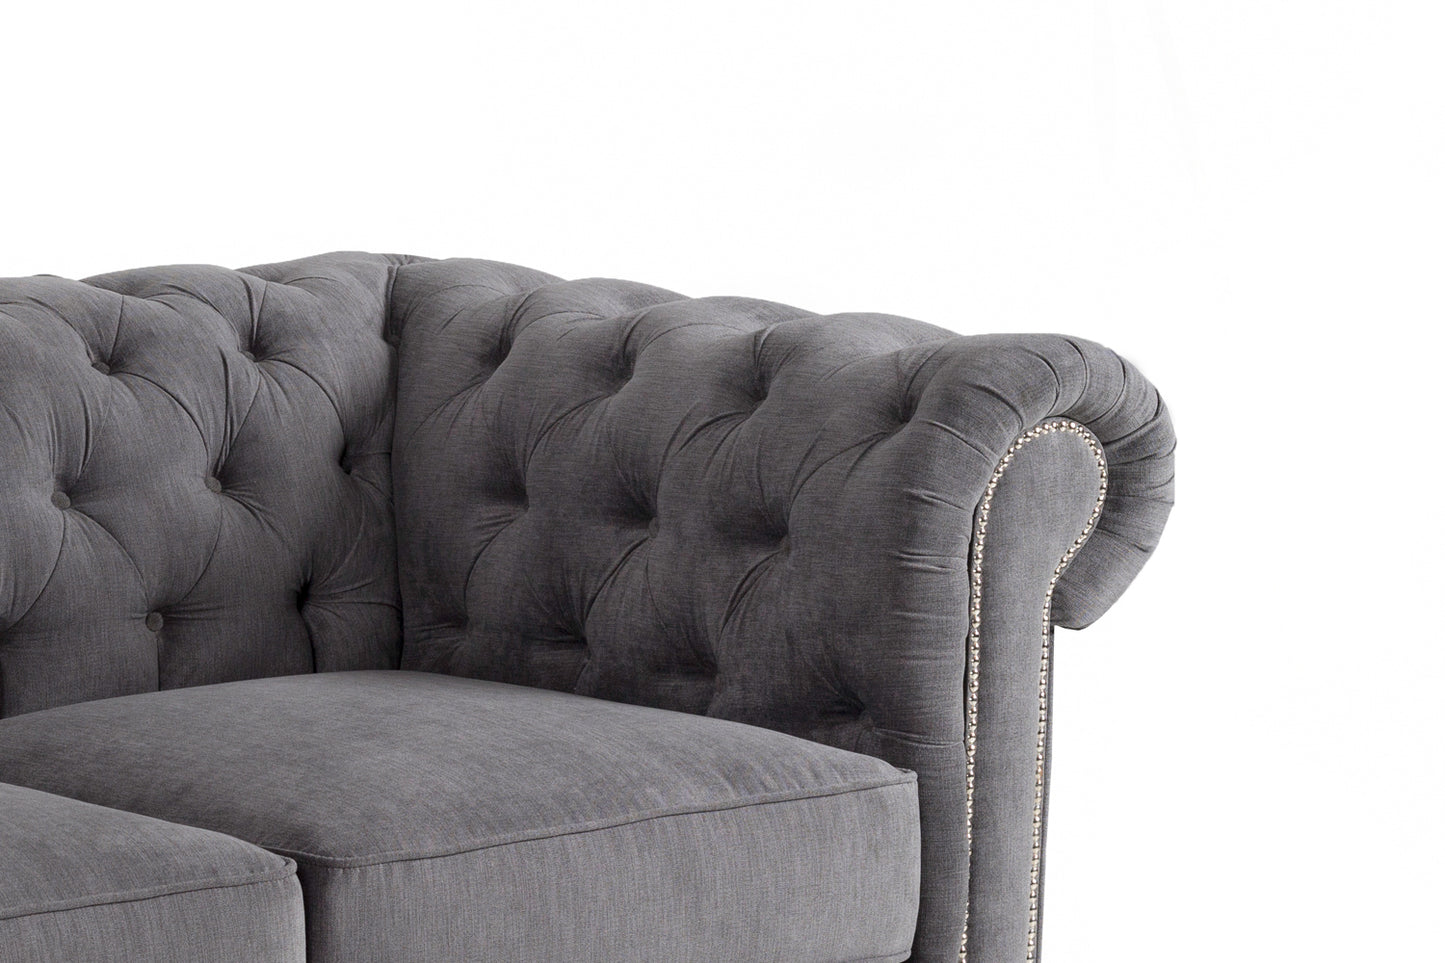 Chesterfield Grey 2 Seater Sofa Bed